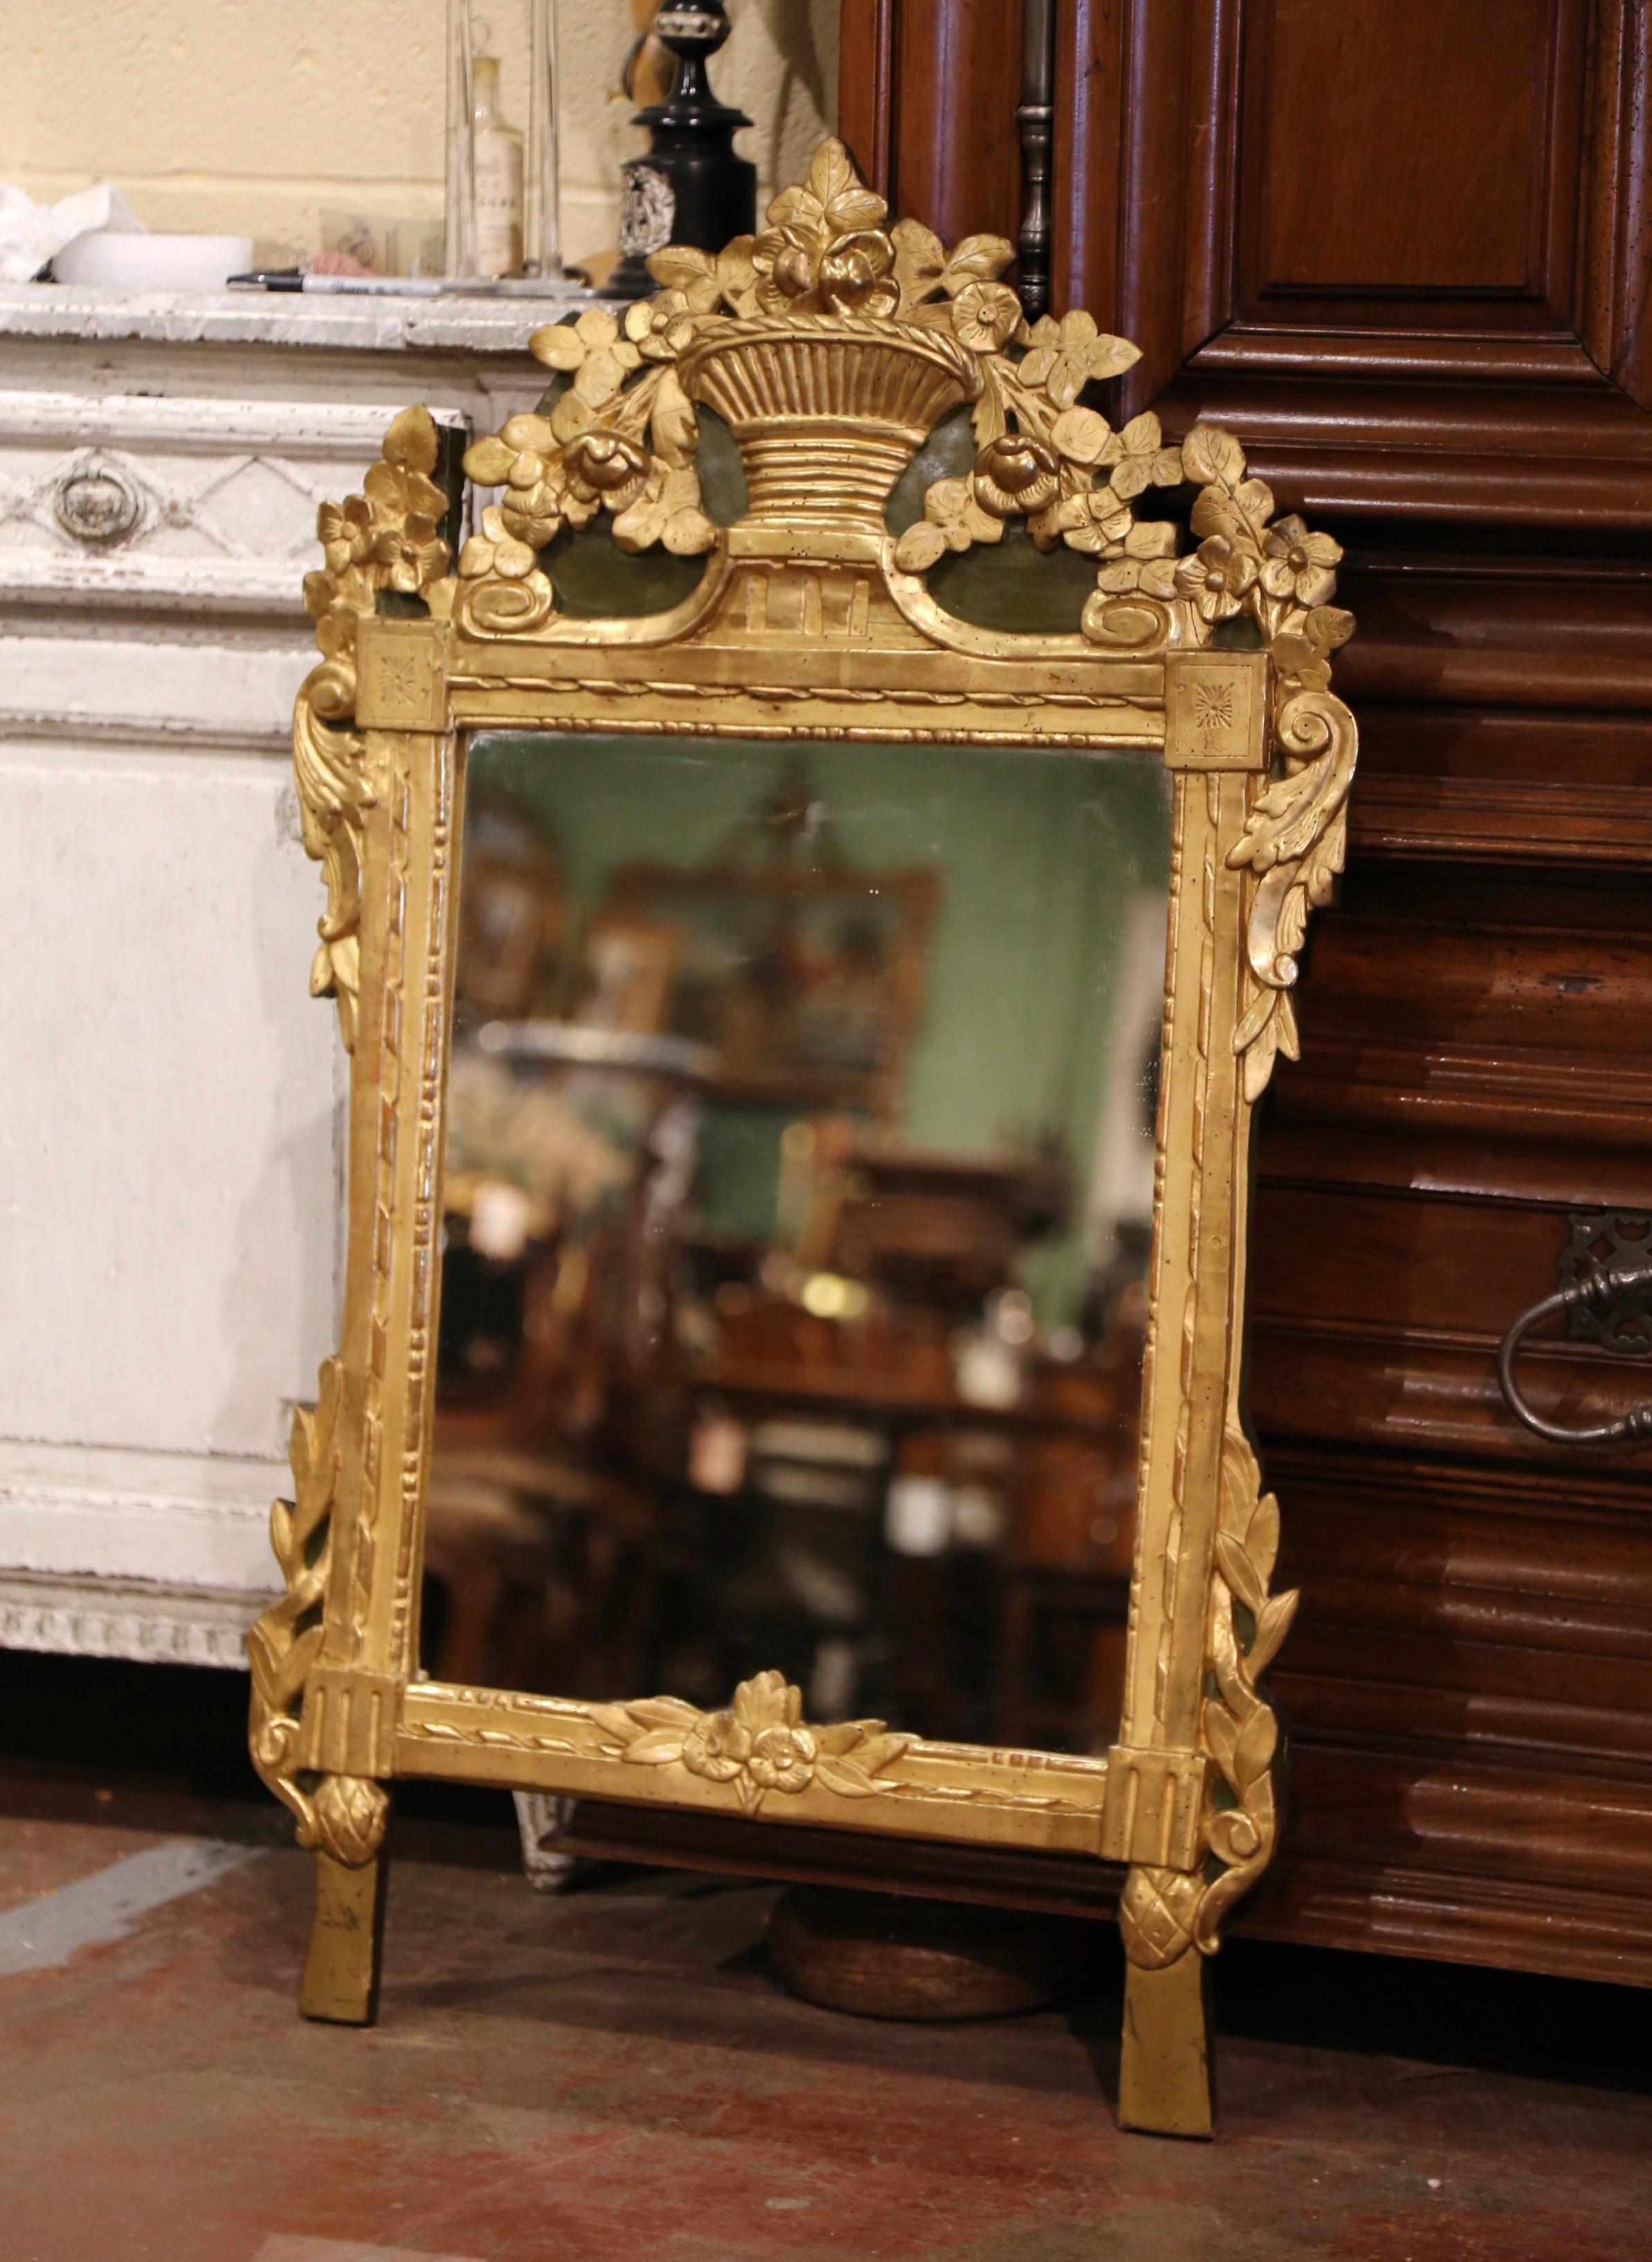 This elegant, antique gilt mirror would make a charming addition to an entryway or powder room. Crafted in Southern France, circa 1780, the rectangular mirror is heavily carved and exemplifies the design elements of the Rococo and Baroque style. The